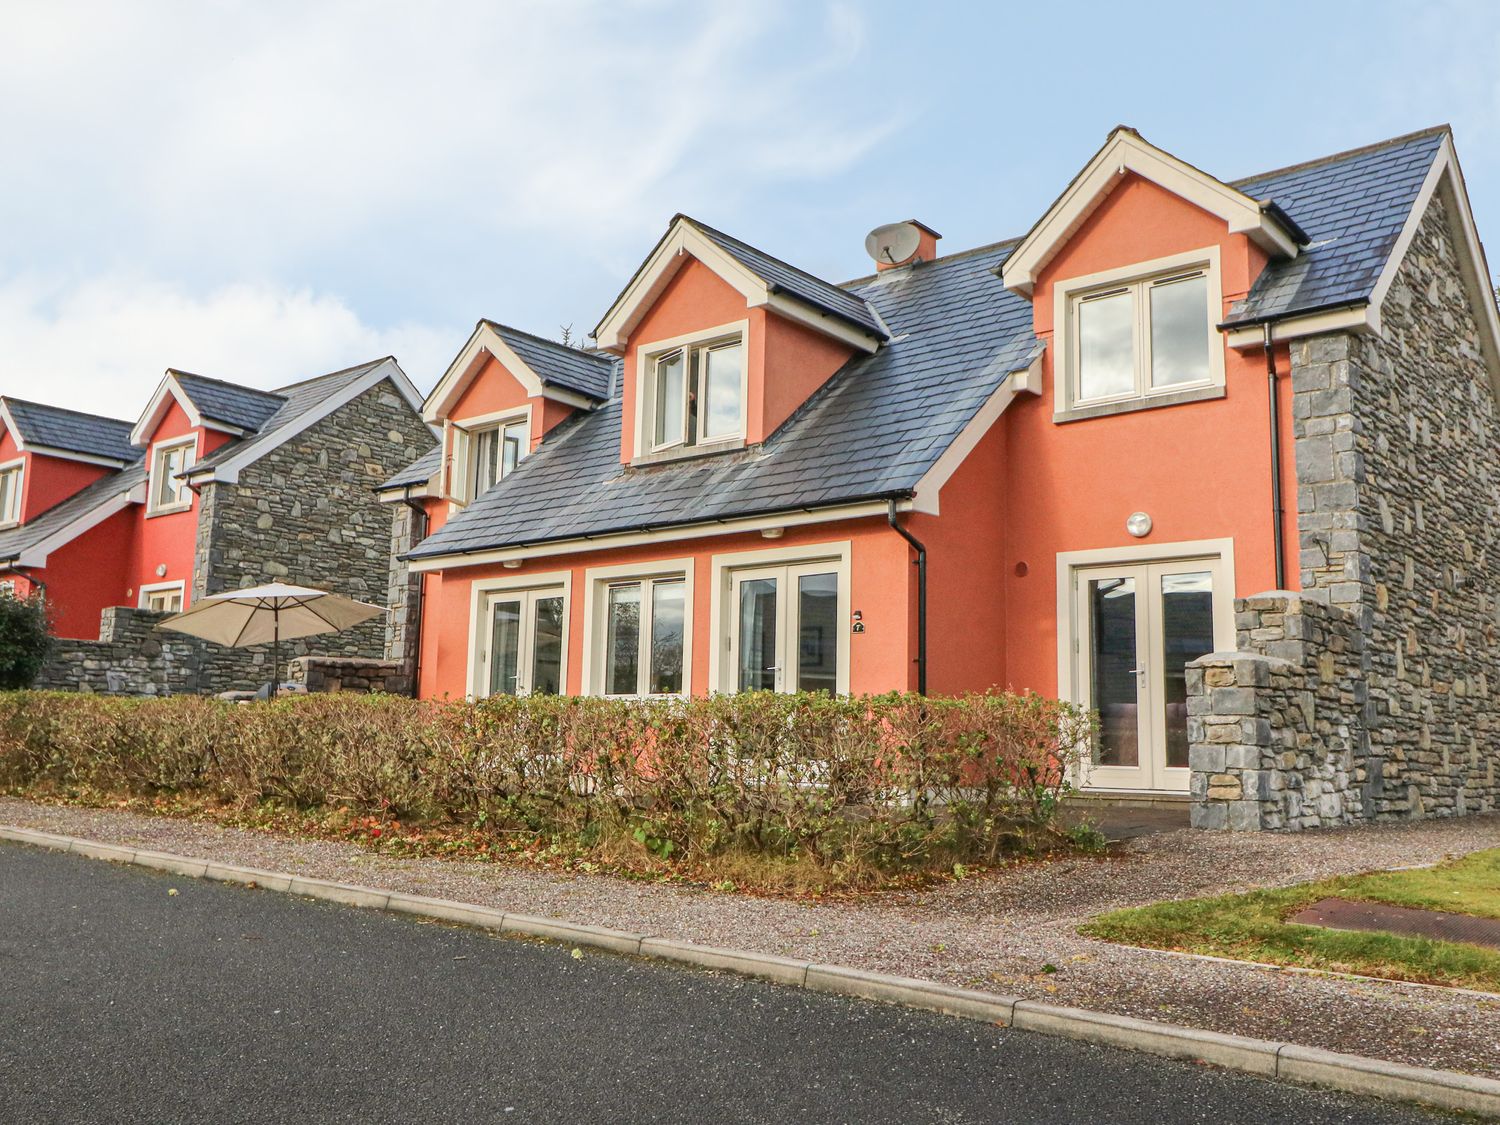 Ring of Kerry Golf Club Cottage - County Kerry - 926997 - photo 1